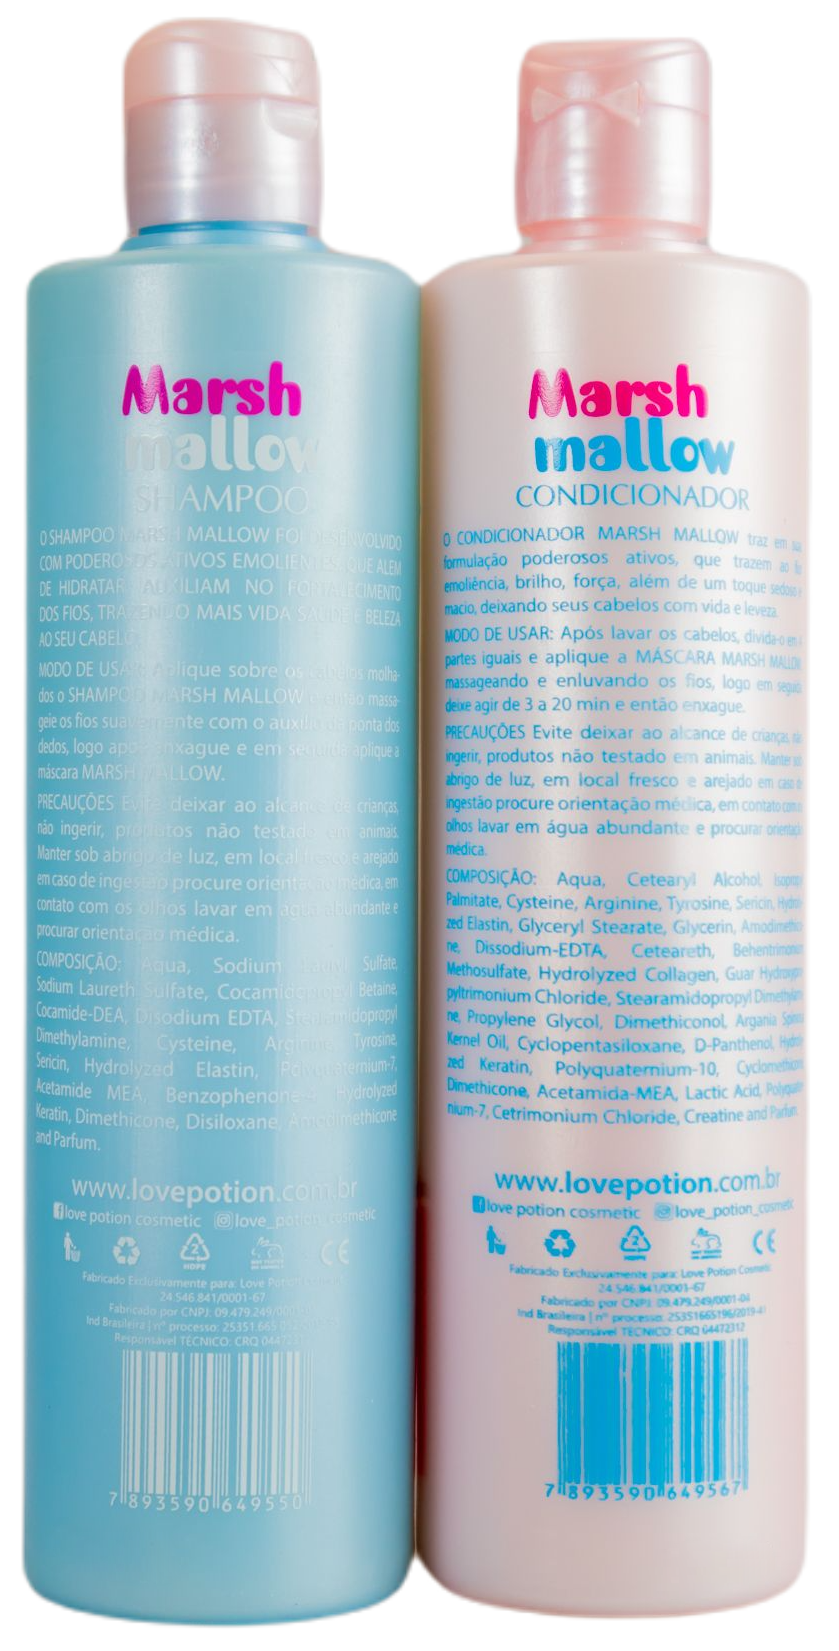 Love Potion Home Care Home Care Maintenance Marshmallow Shampoo and Conditioner 2x500ml - Love Potion